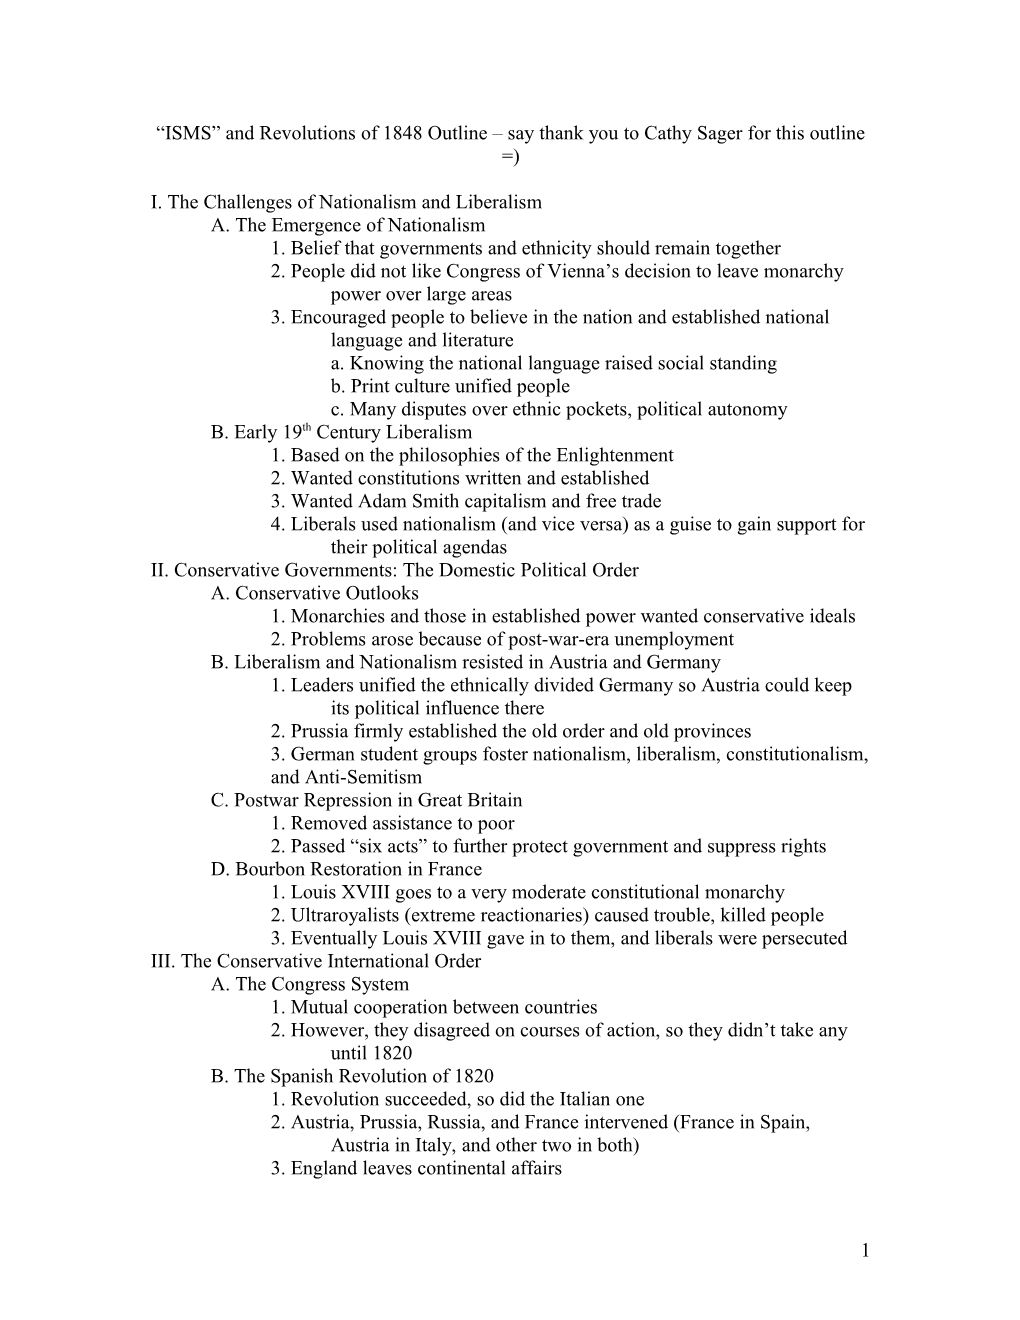 ISMS and Revolutions of 1848 Outline